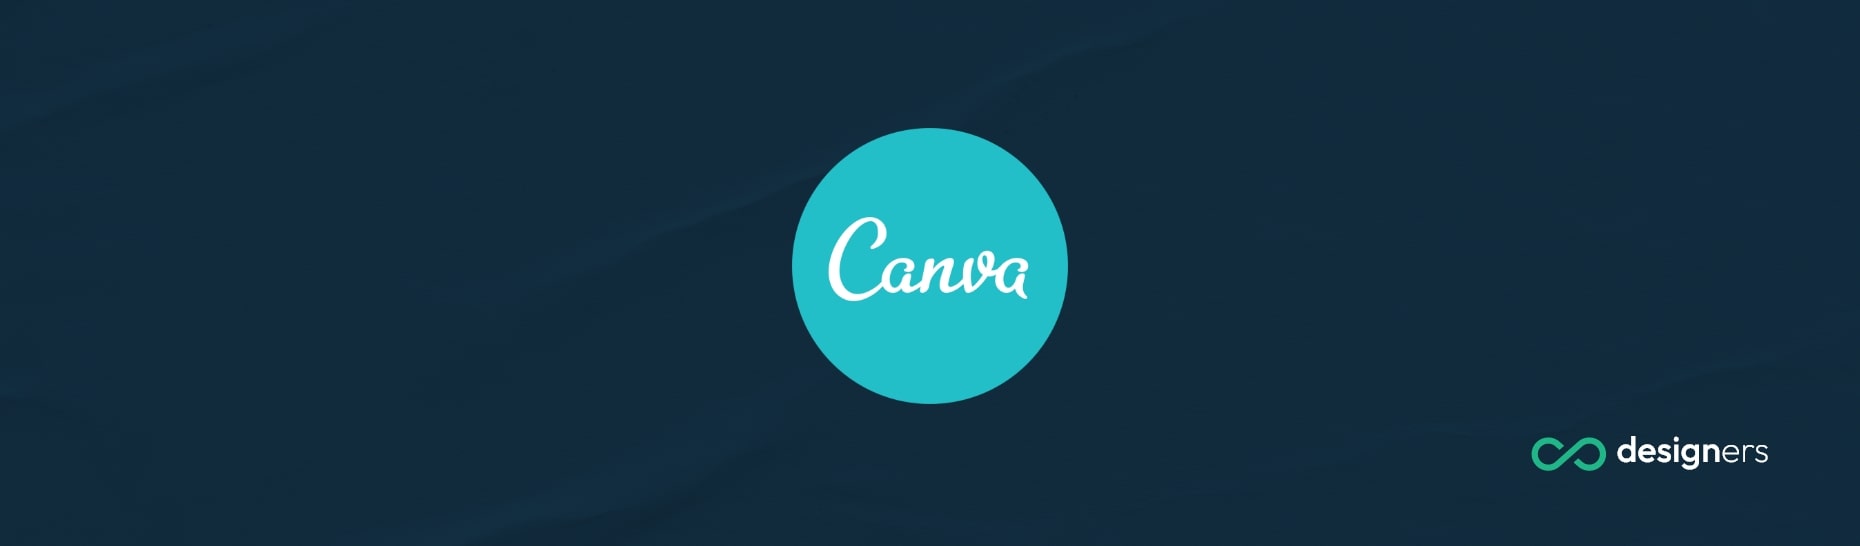 What Is the Company Name of Canva?